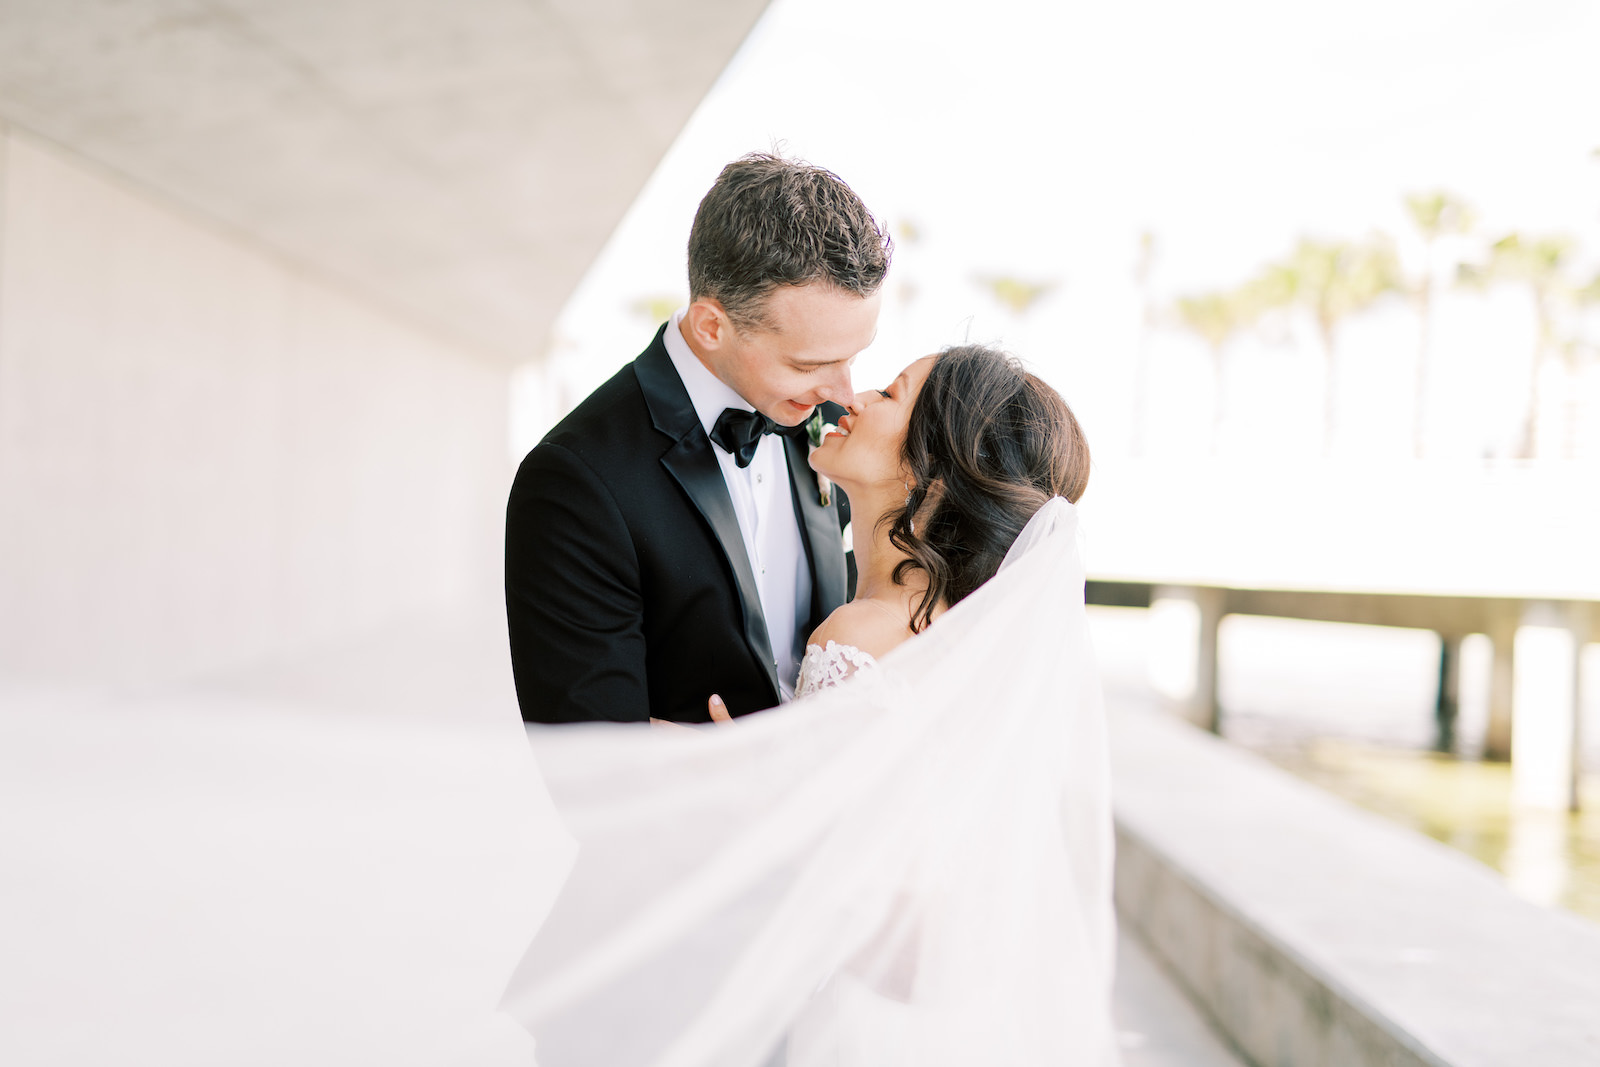 Florida Bride and Groom Intimate Kiss with Veil Blowing in Wind | Tampa Bay Wedding Photographer Kera Photography | Wedding Hair and Makeup Femme Akoi